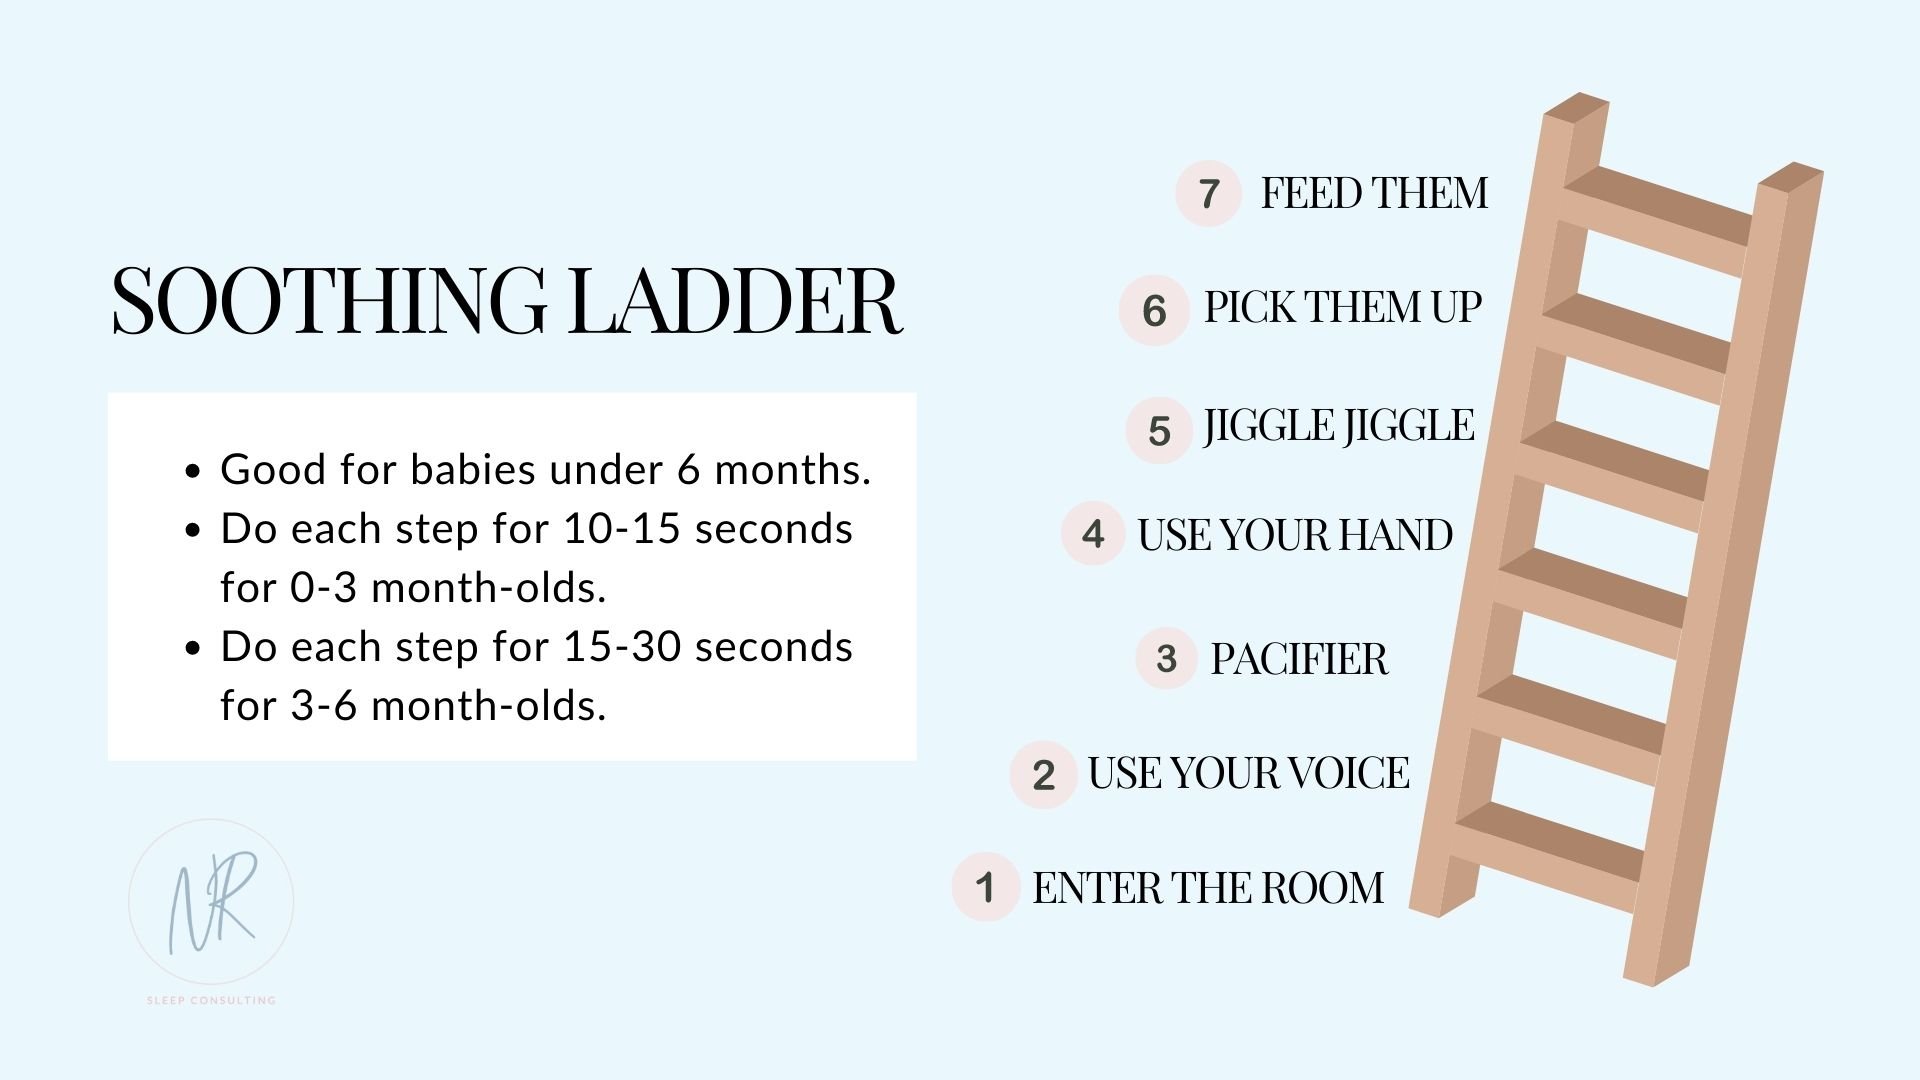 The Soothing Ladder Method: New Parent's Guide to Getting Baby to